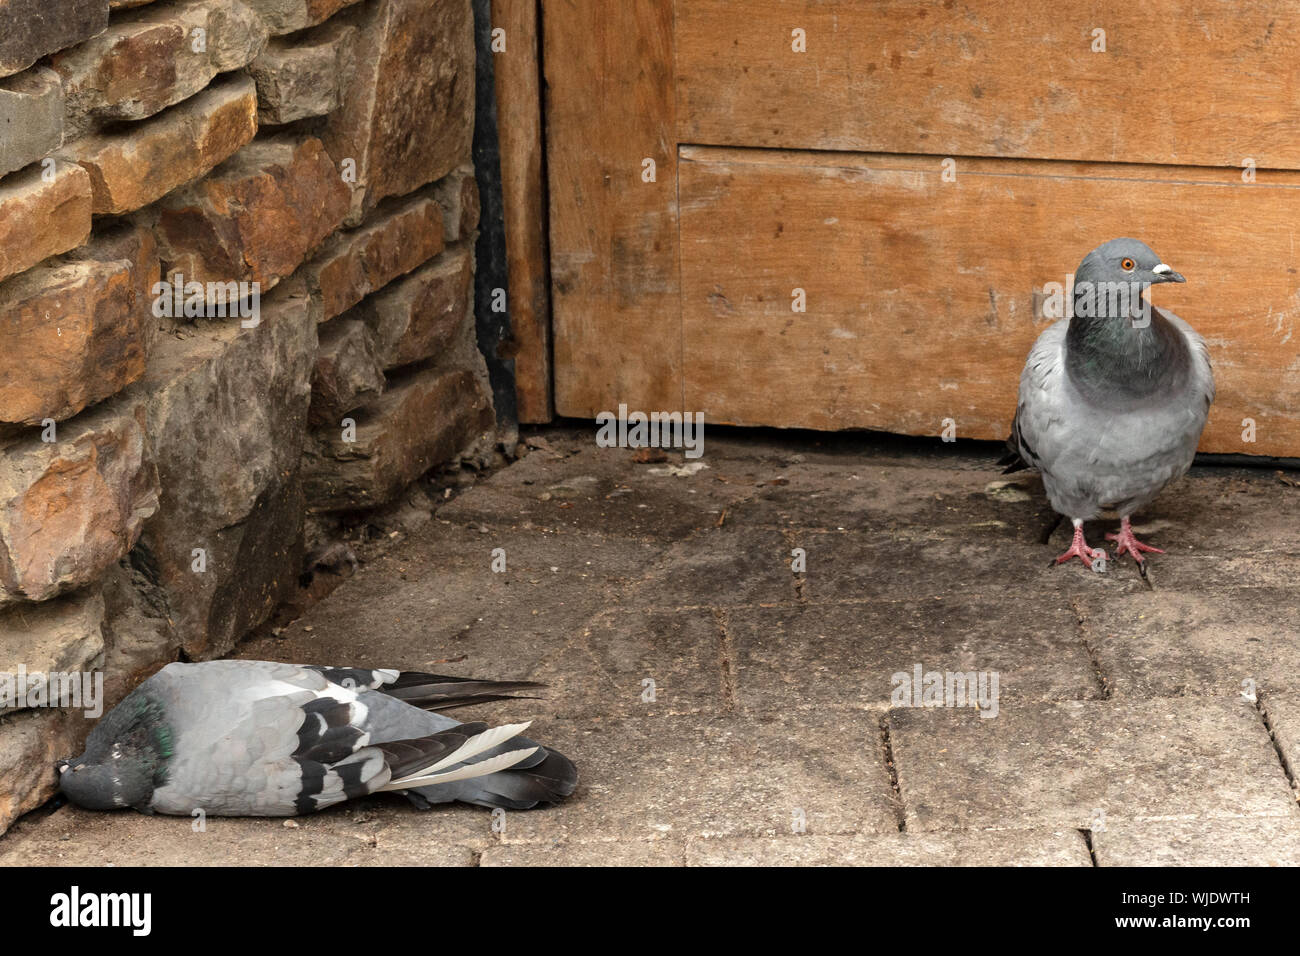 Two pigeons one dead on dirty pavement sidewalk as wildlife in urban environment concept. Stock Photo